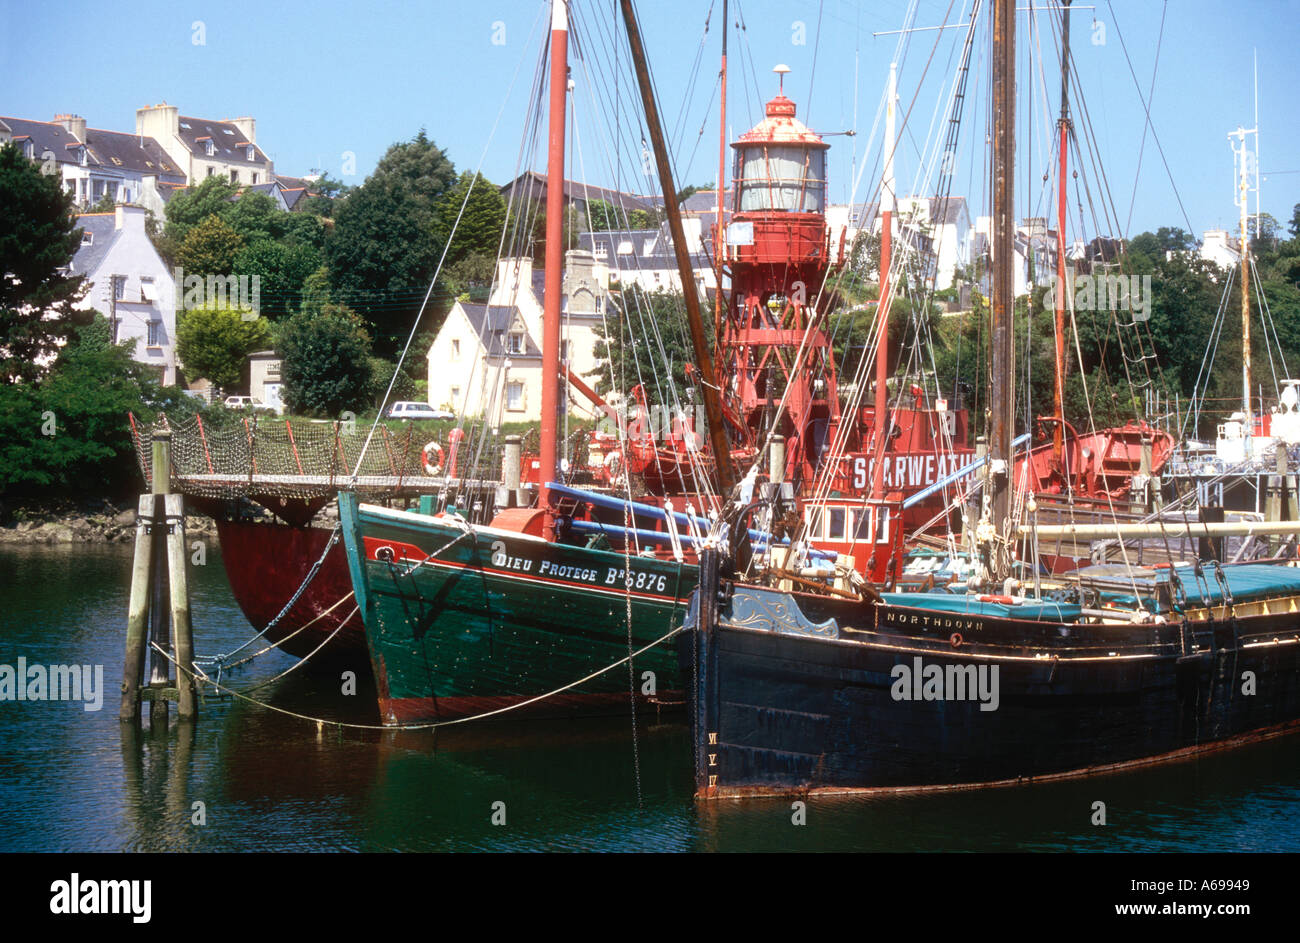 An historic barge fishing boat and lightship at Dournenez maritime museum in Finistère Bretagne France Stock Photo